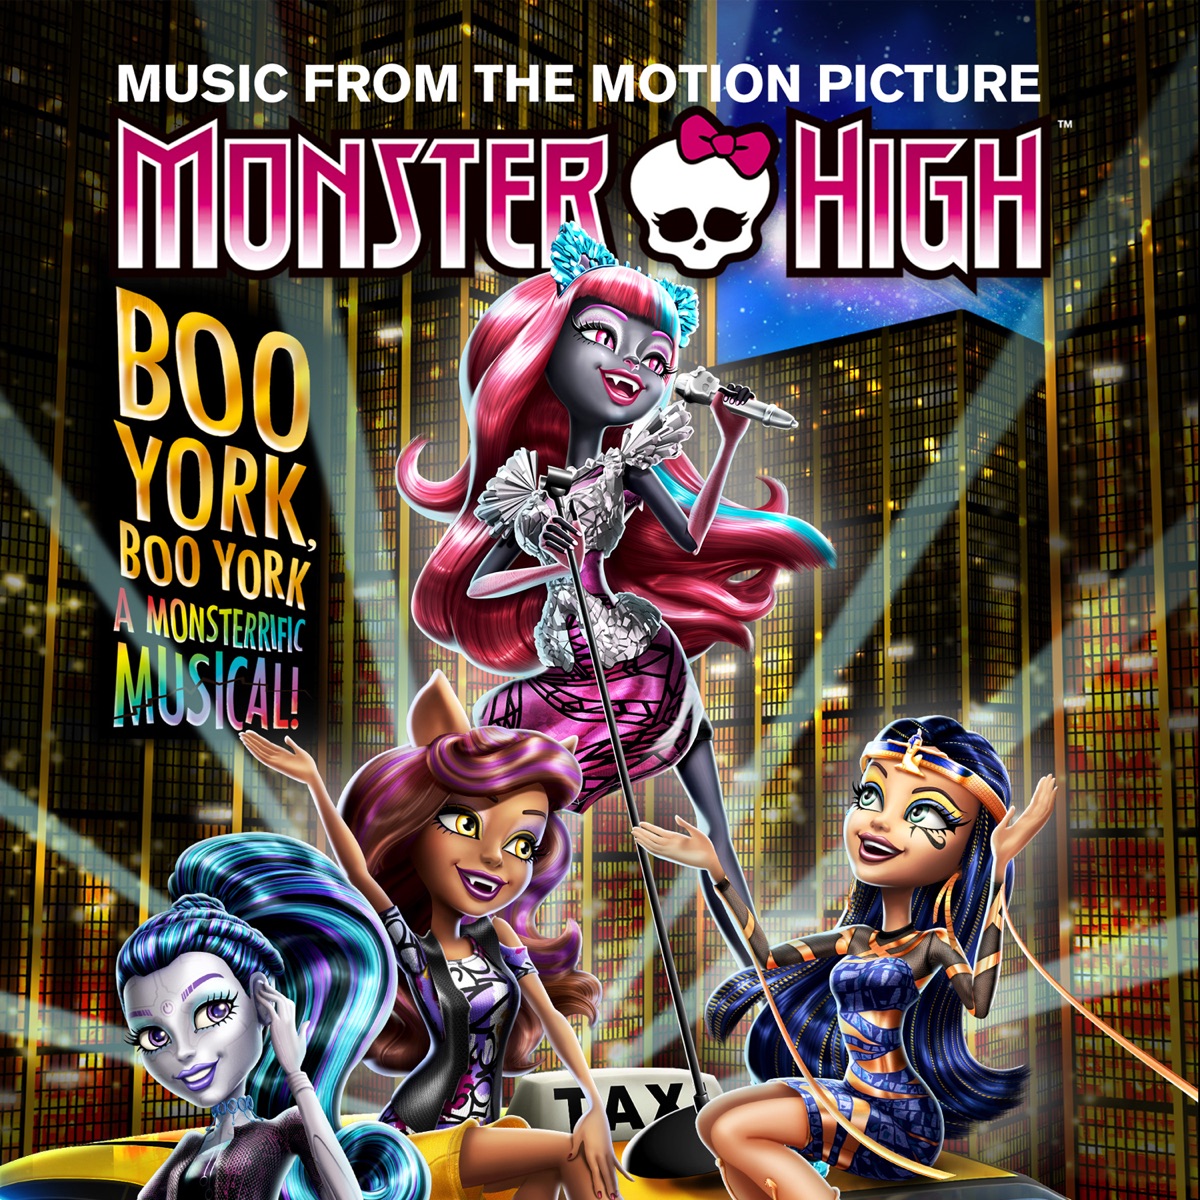 ‎Boo York, Boo York (Original Motion Picture Soundtrack) - Album by Monster  High - Apple Music